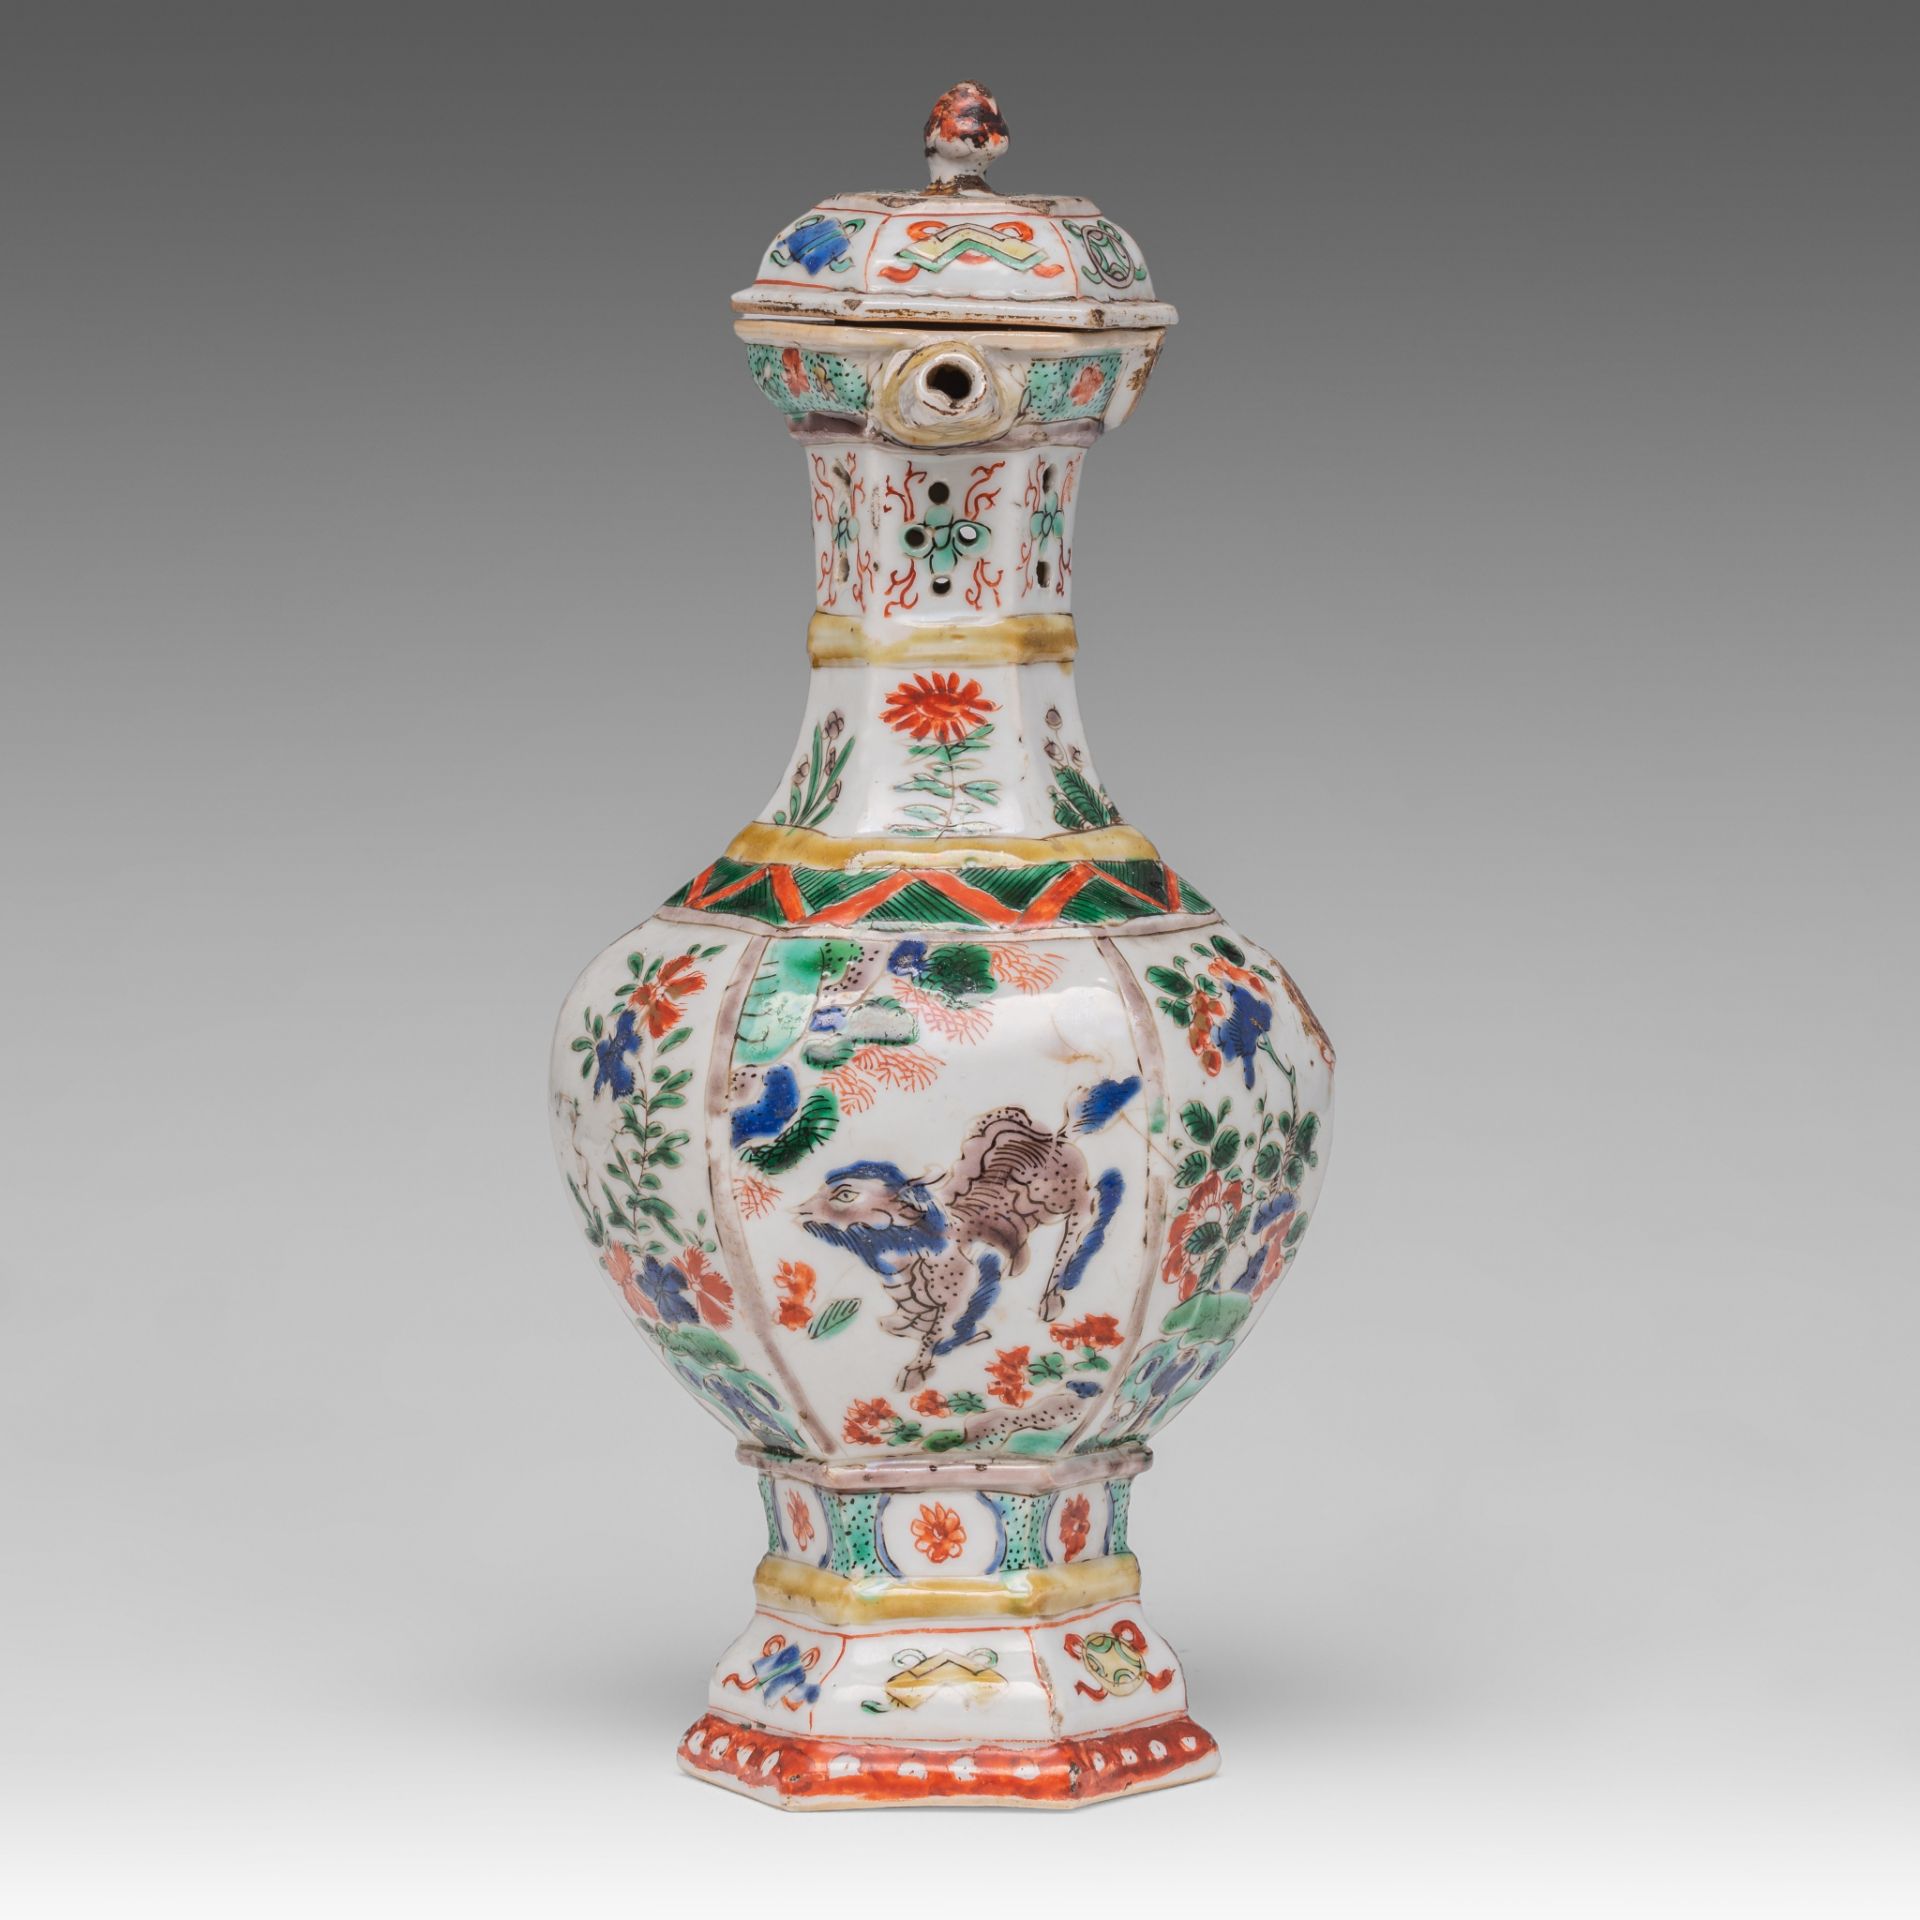 A Chinese famille verte hexagonal puzzle jug or ewer, Kangxi period, H 23,5 cm - Image 2 of 7